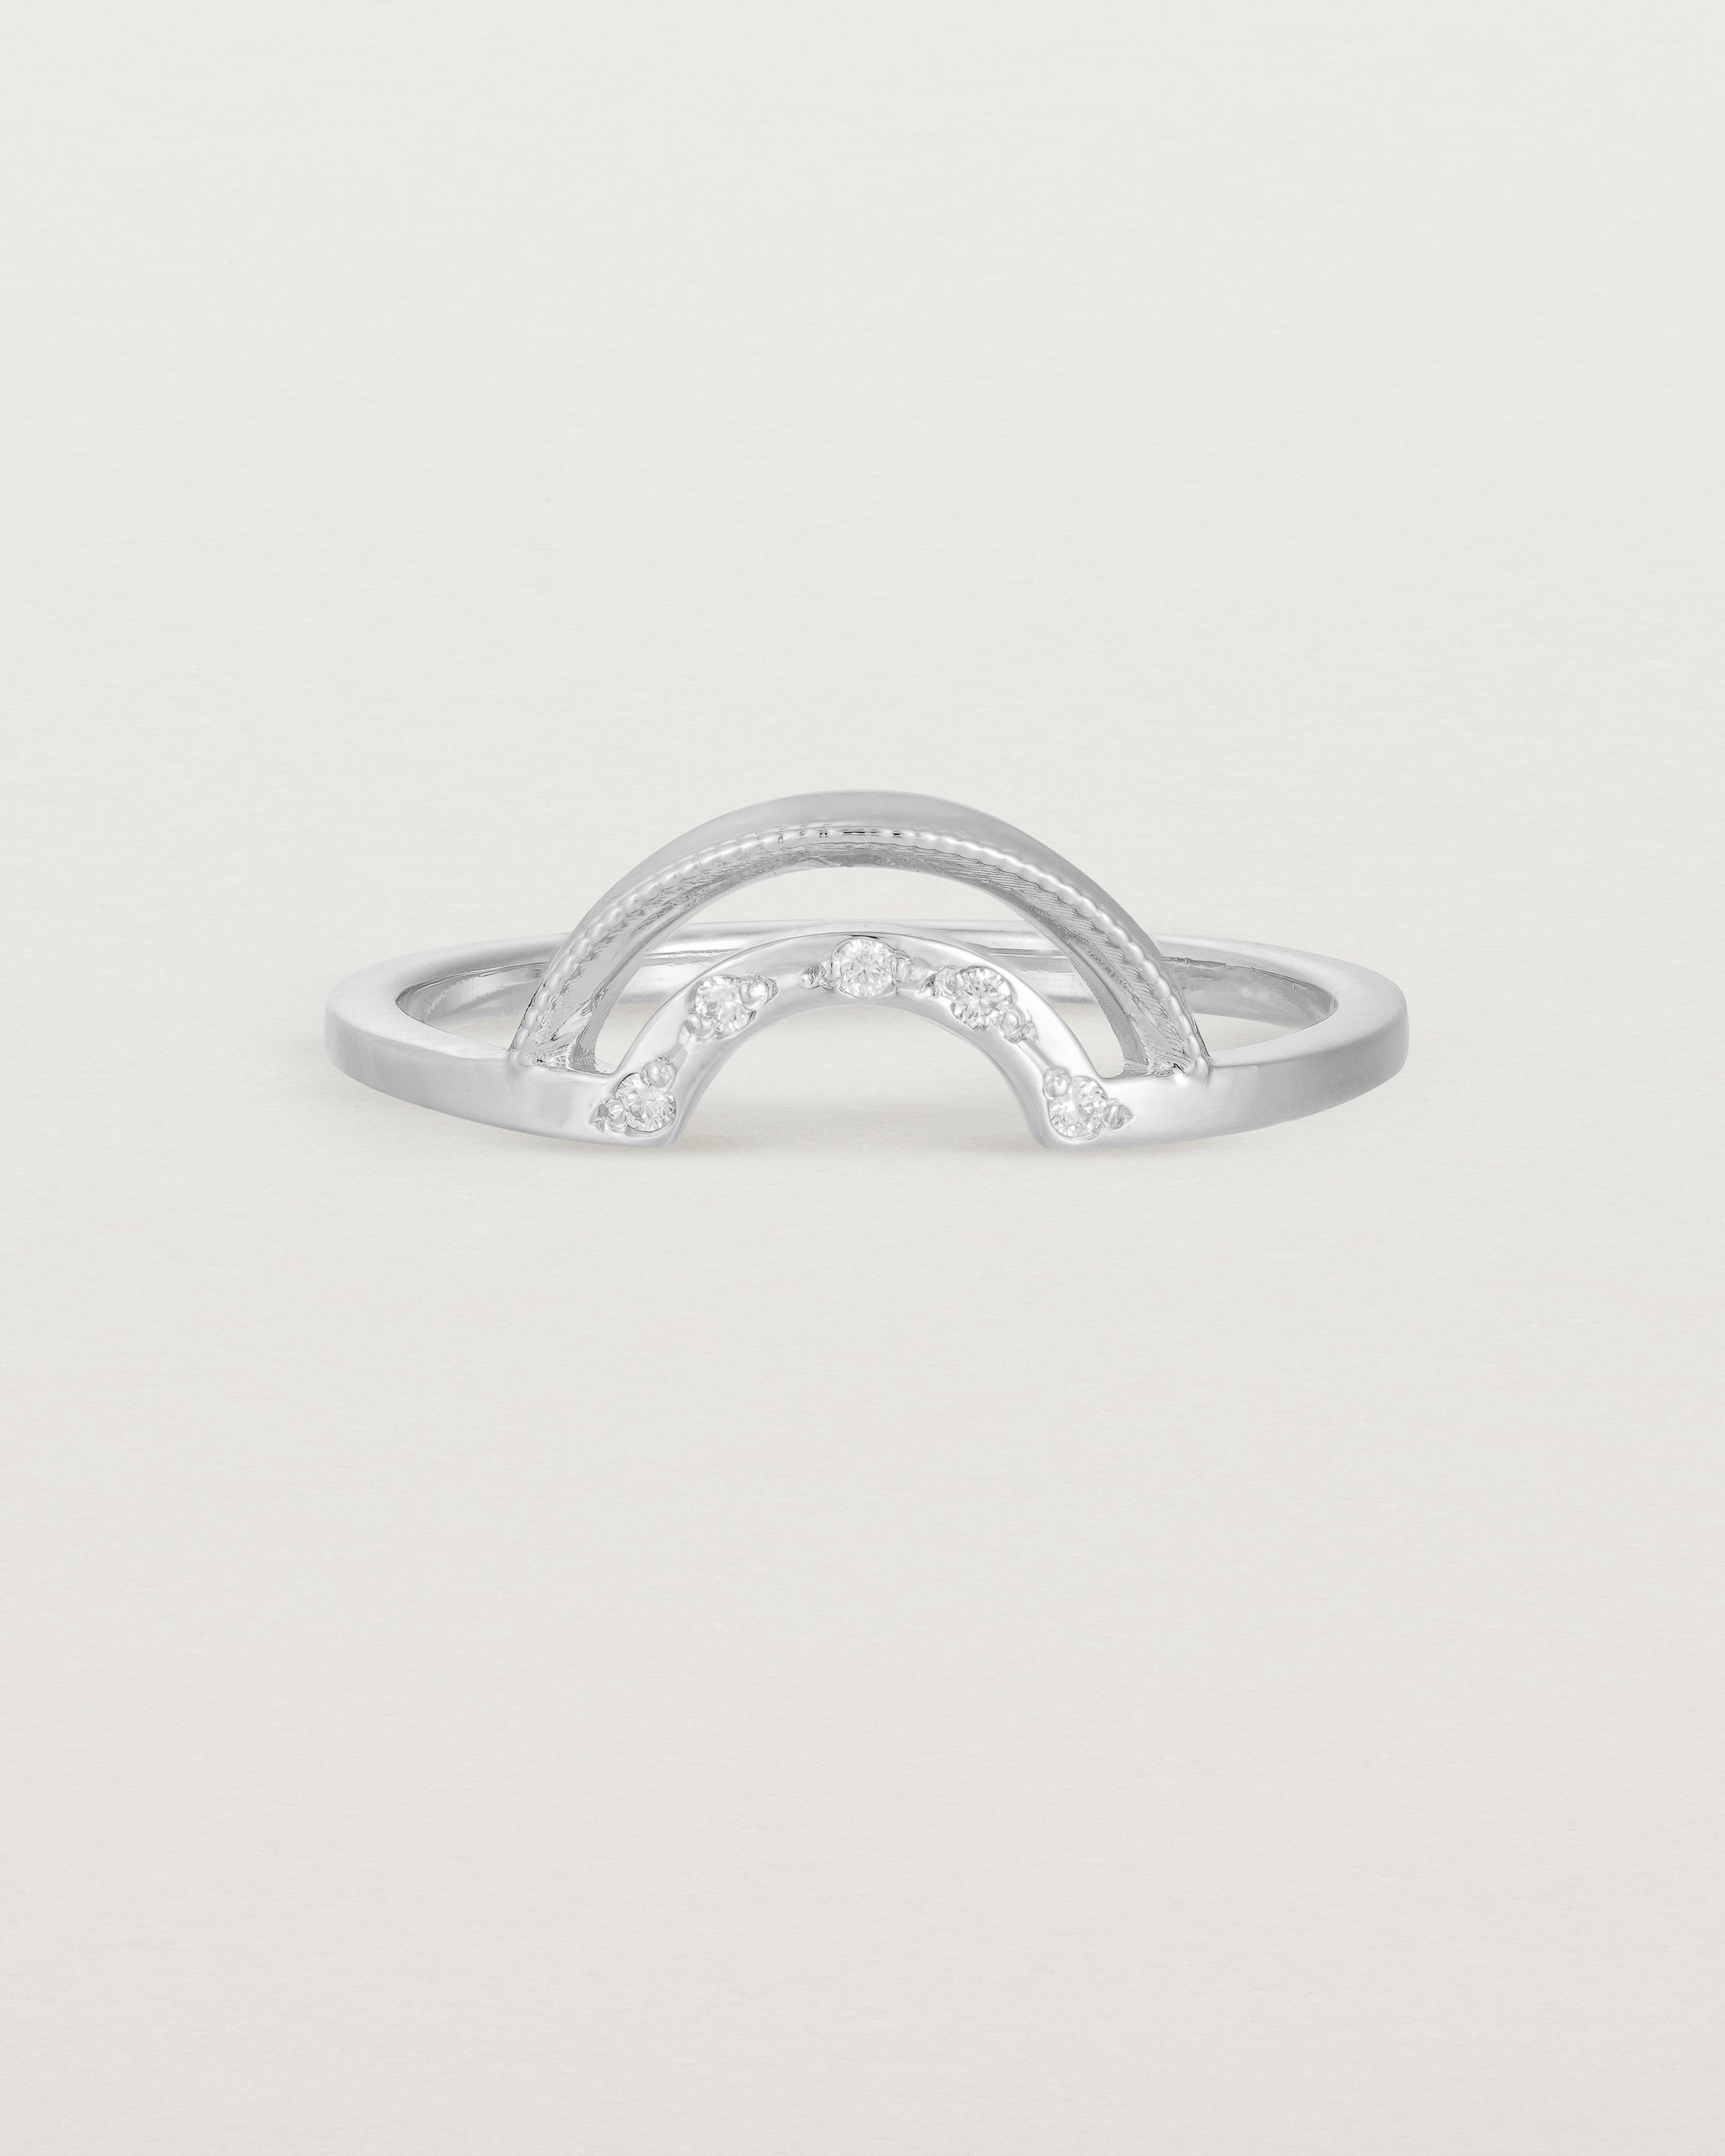 A double arc crown ring with white diamonds adoring the inner arc - crafted in white gold. 